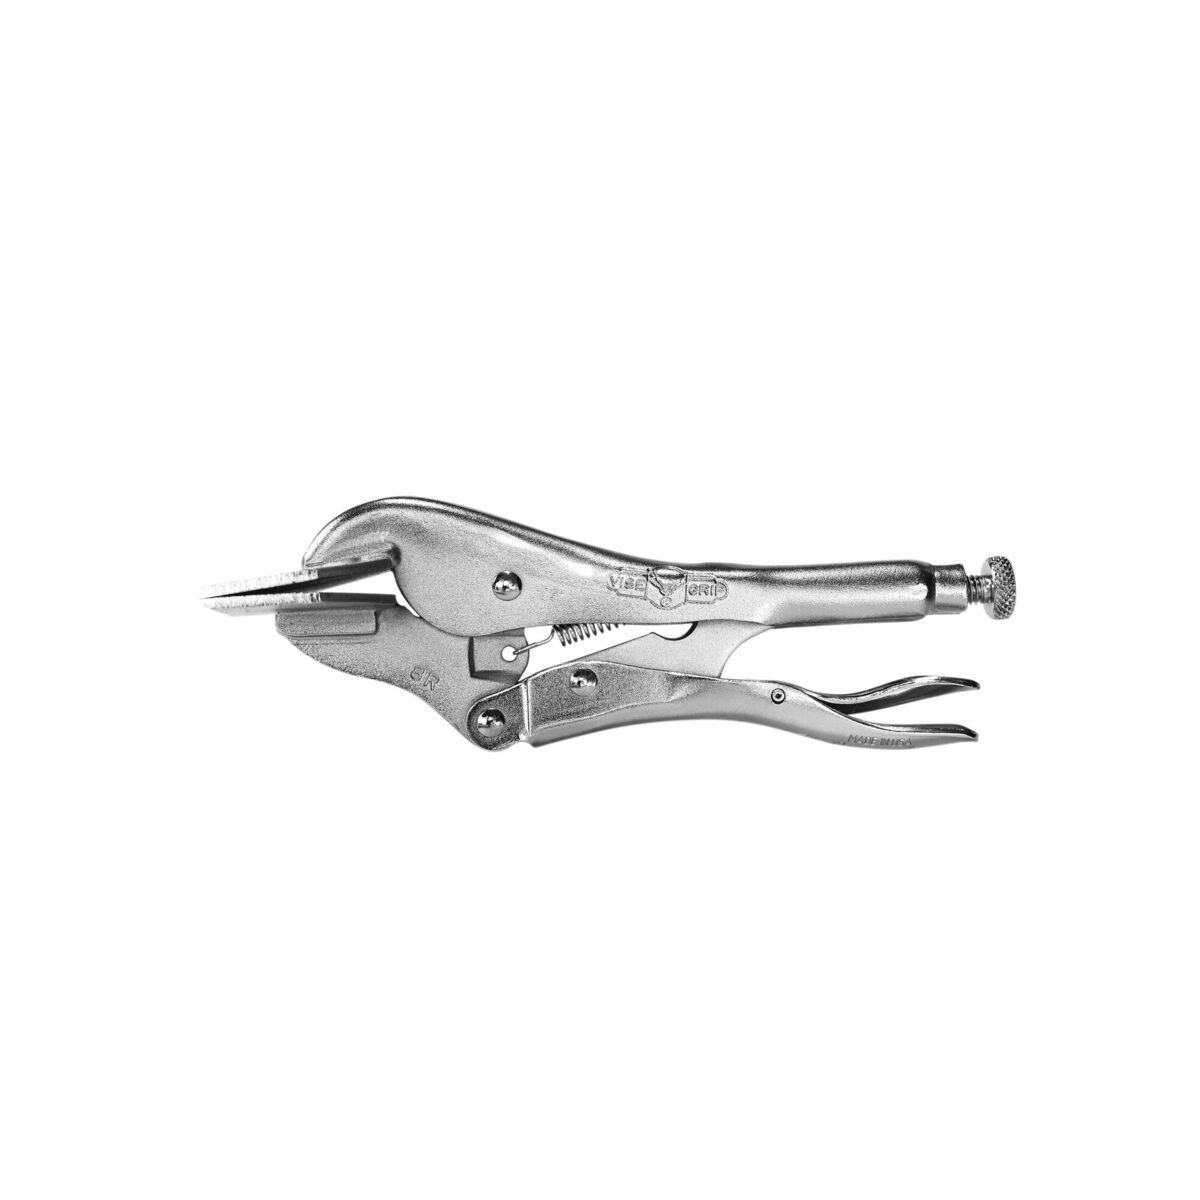 Vise-Grip Flat Nose Duckbill Pliers, 8 Overall, 1-1/5 Jaw Length, 2